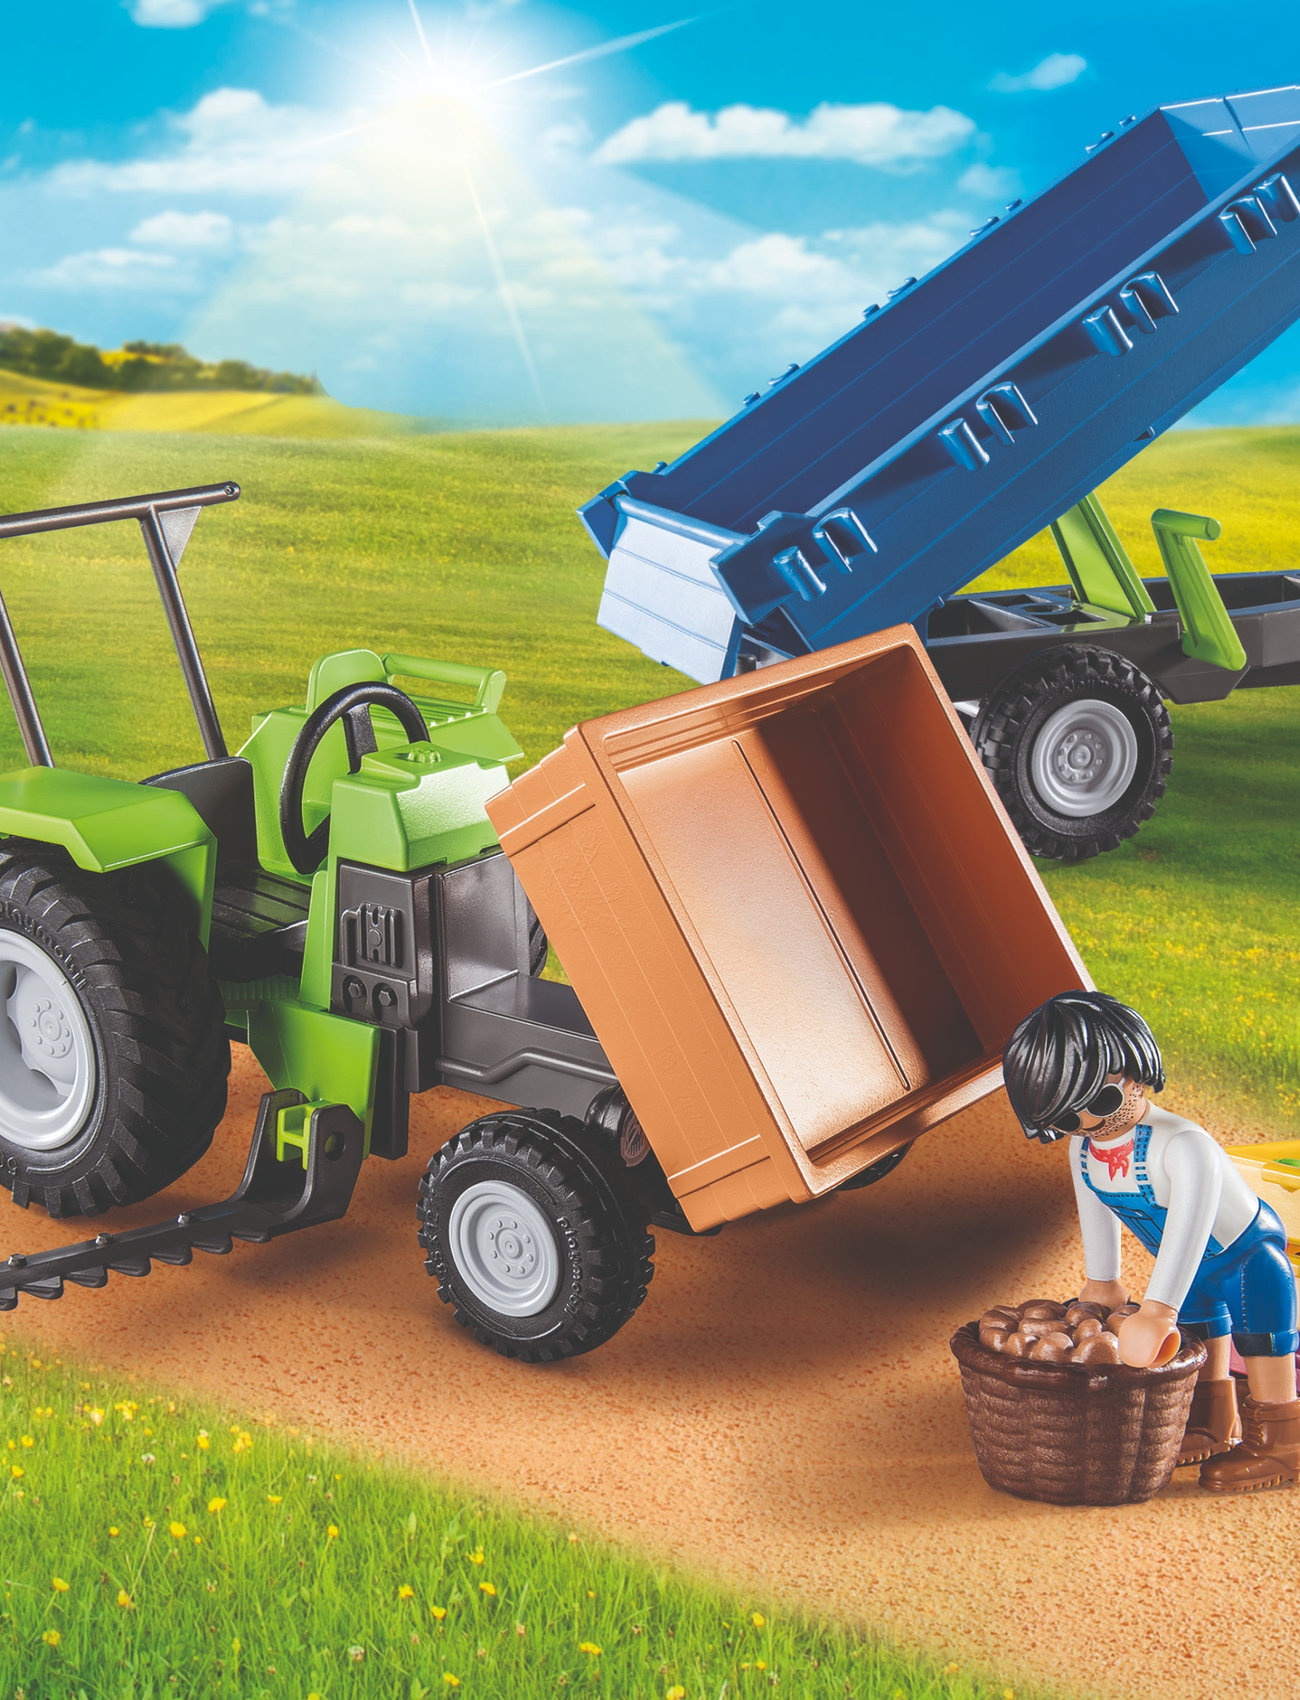 PLAYMOBIL - PLAYMOBIL Country Traktor med anhænger - 71249 - playmobil country - multicolored - 1